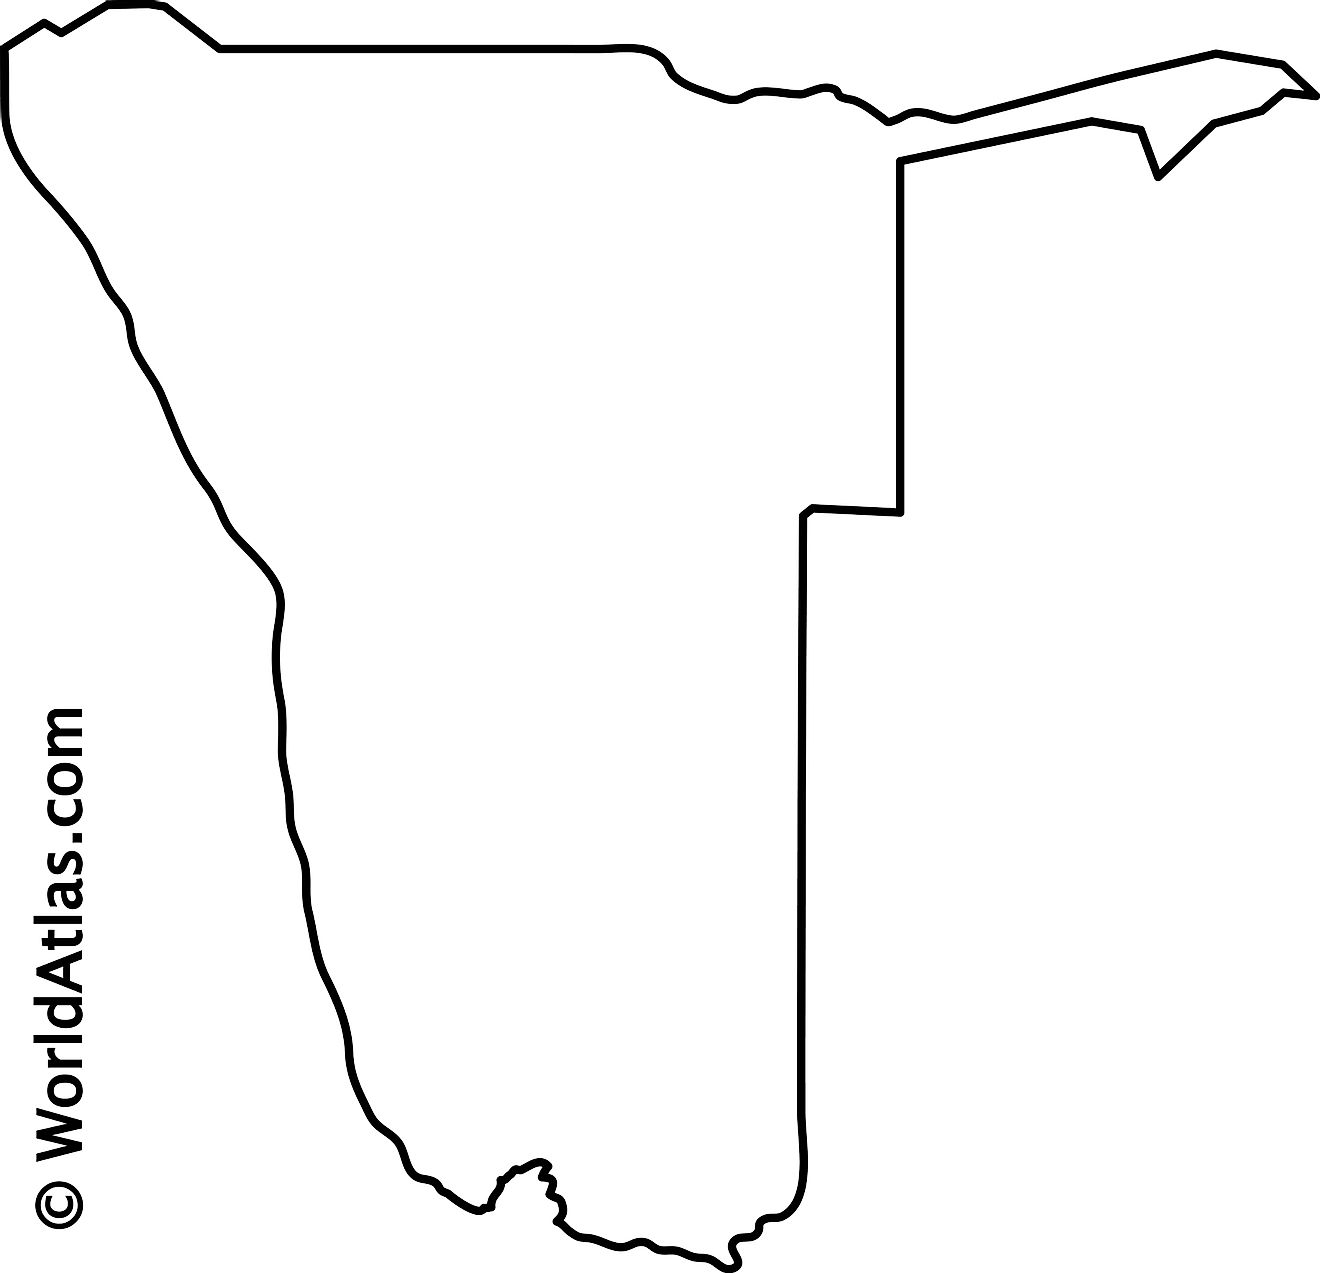 Blank Outline Map of Namibia